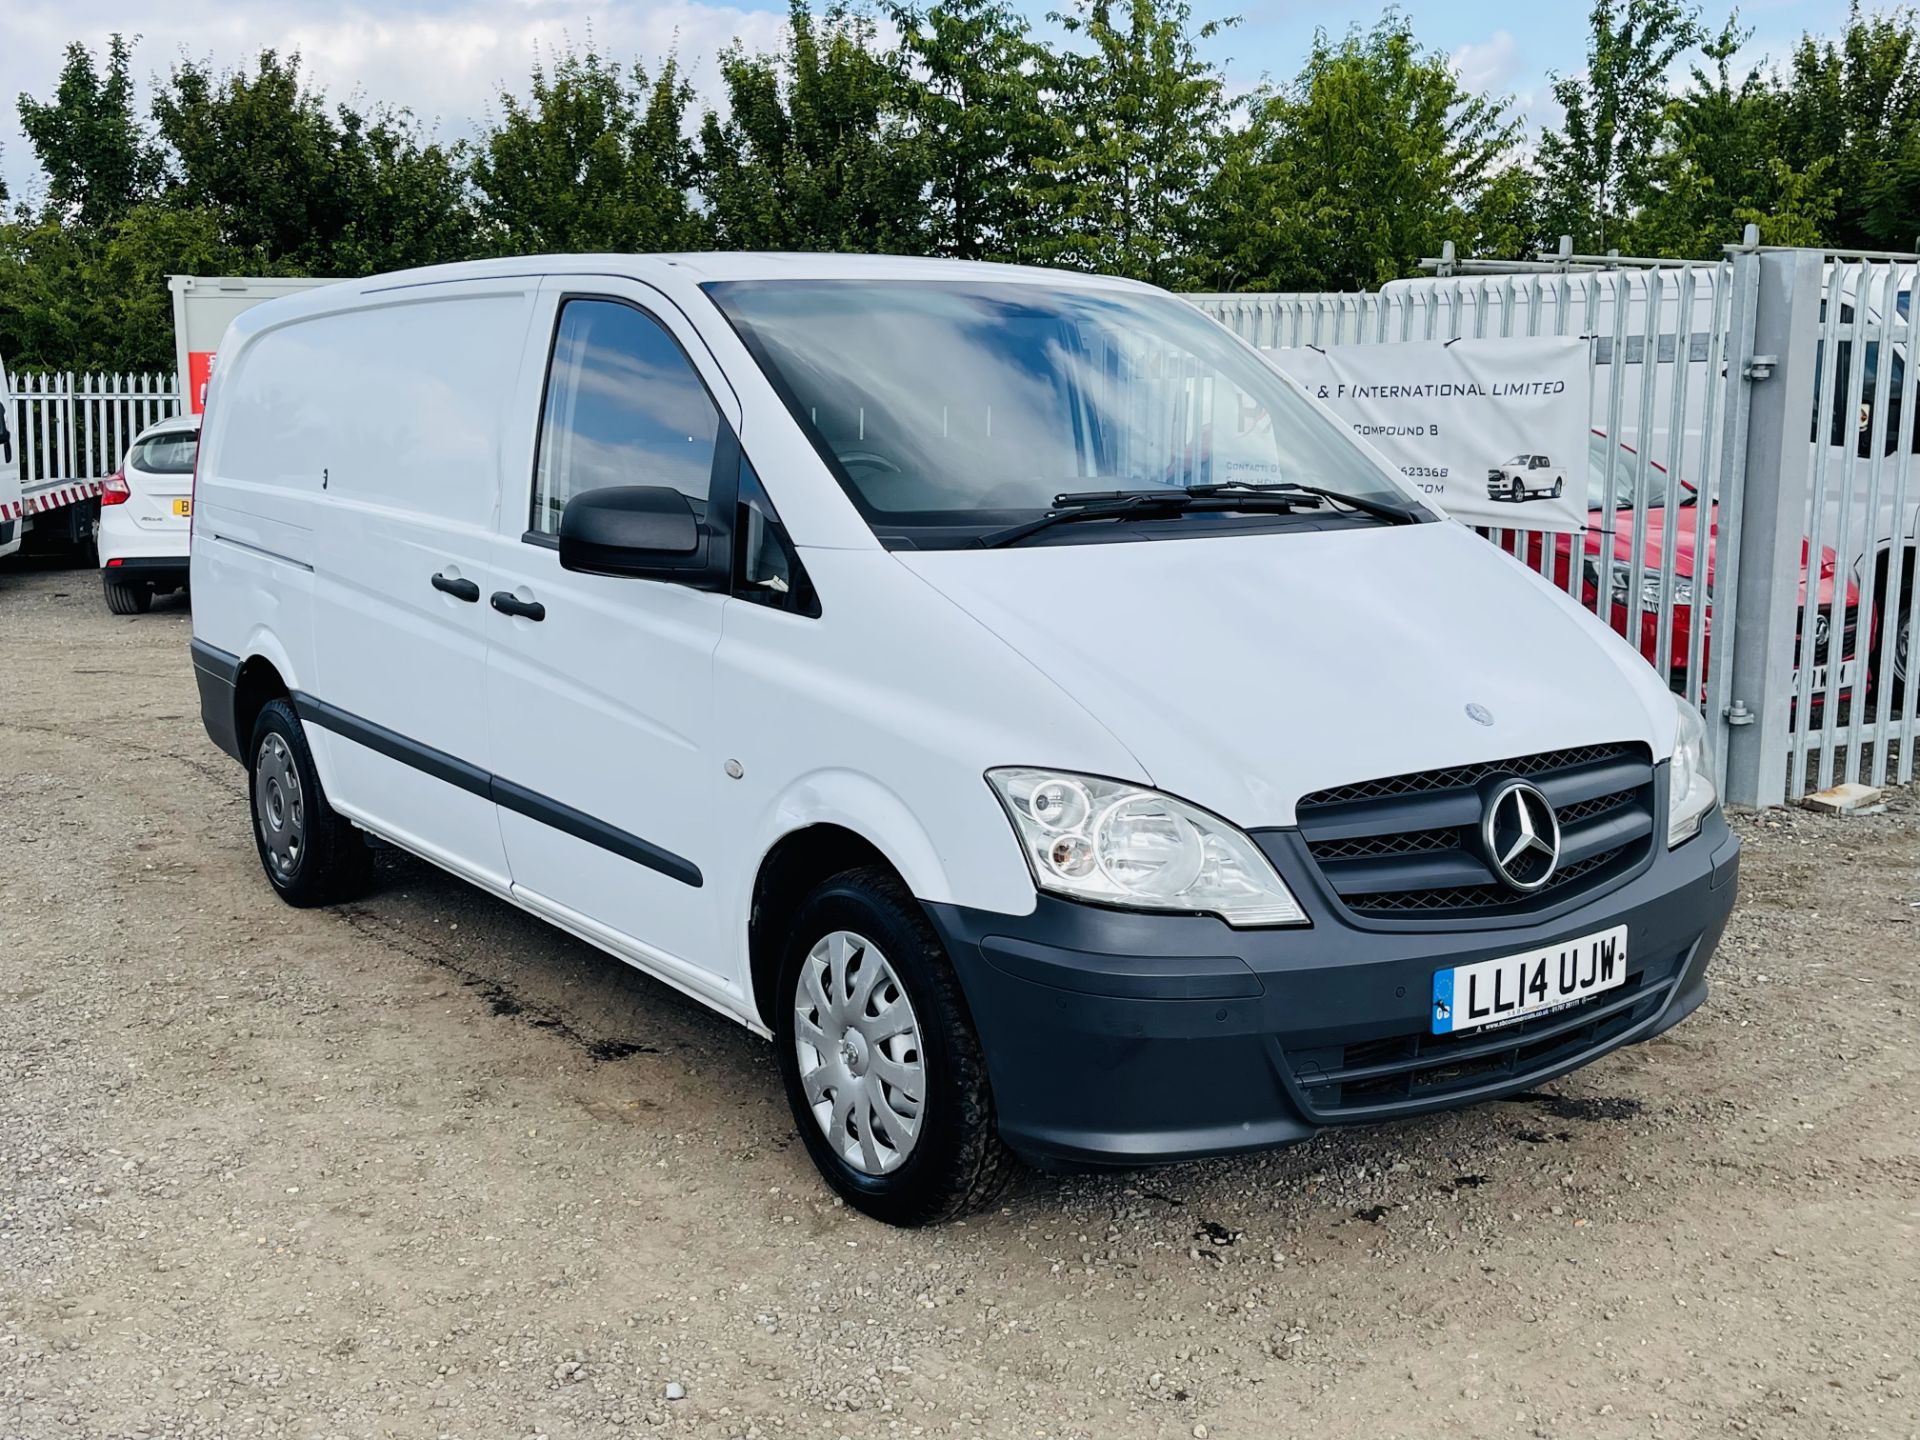 ** ON SALE ** Mercedes-Benz Vito 2.1 113 CDI Long Low Roof - 2014 '14 Reg' - Cruise Control -